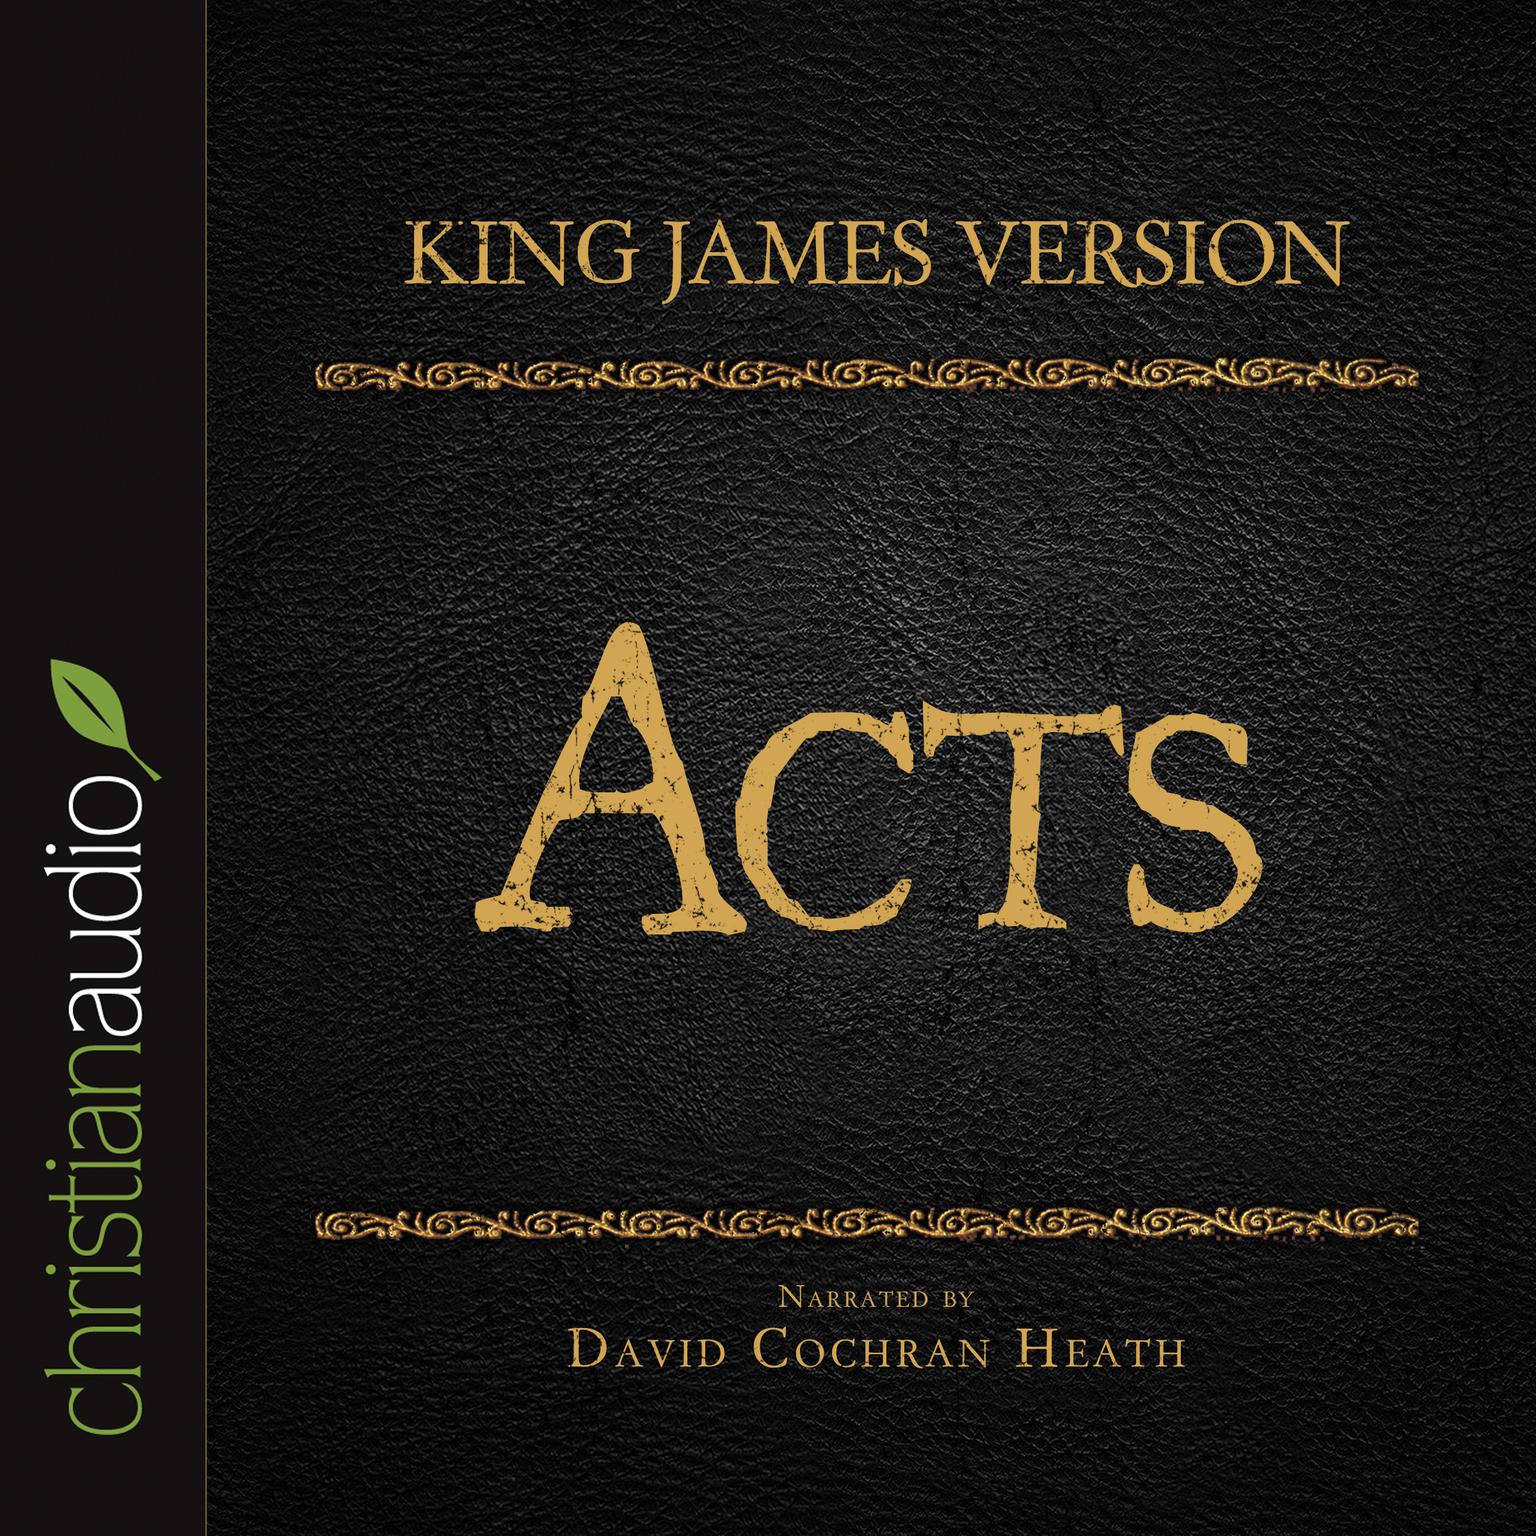 Holy Bible in Audio - King James Version: Acts Audiobook, by David Cochran Heath